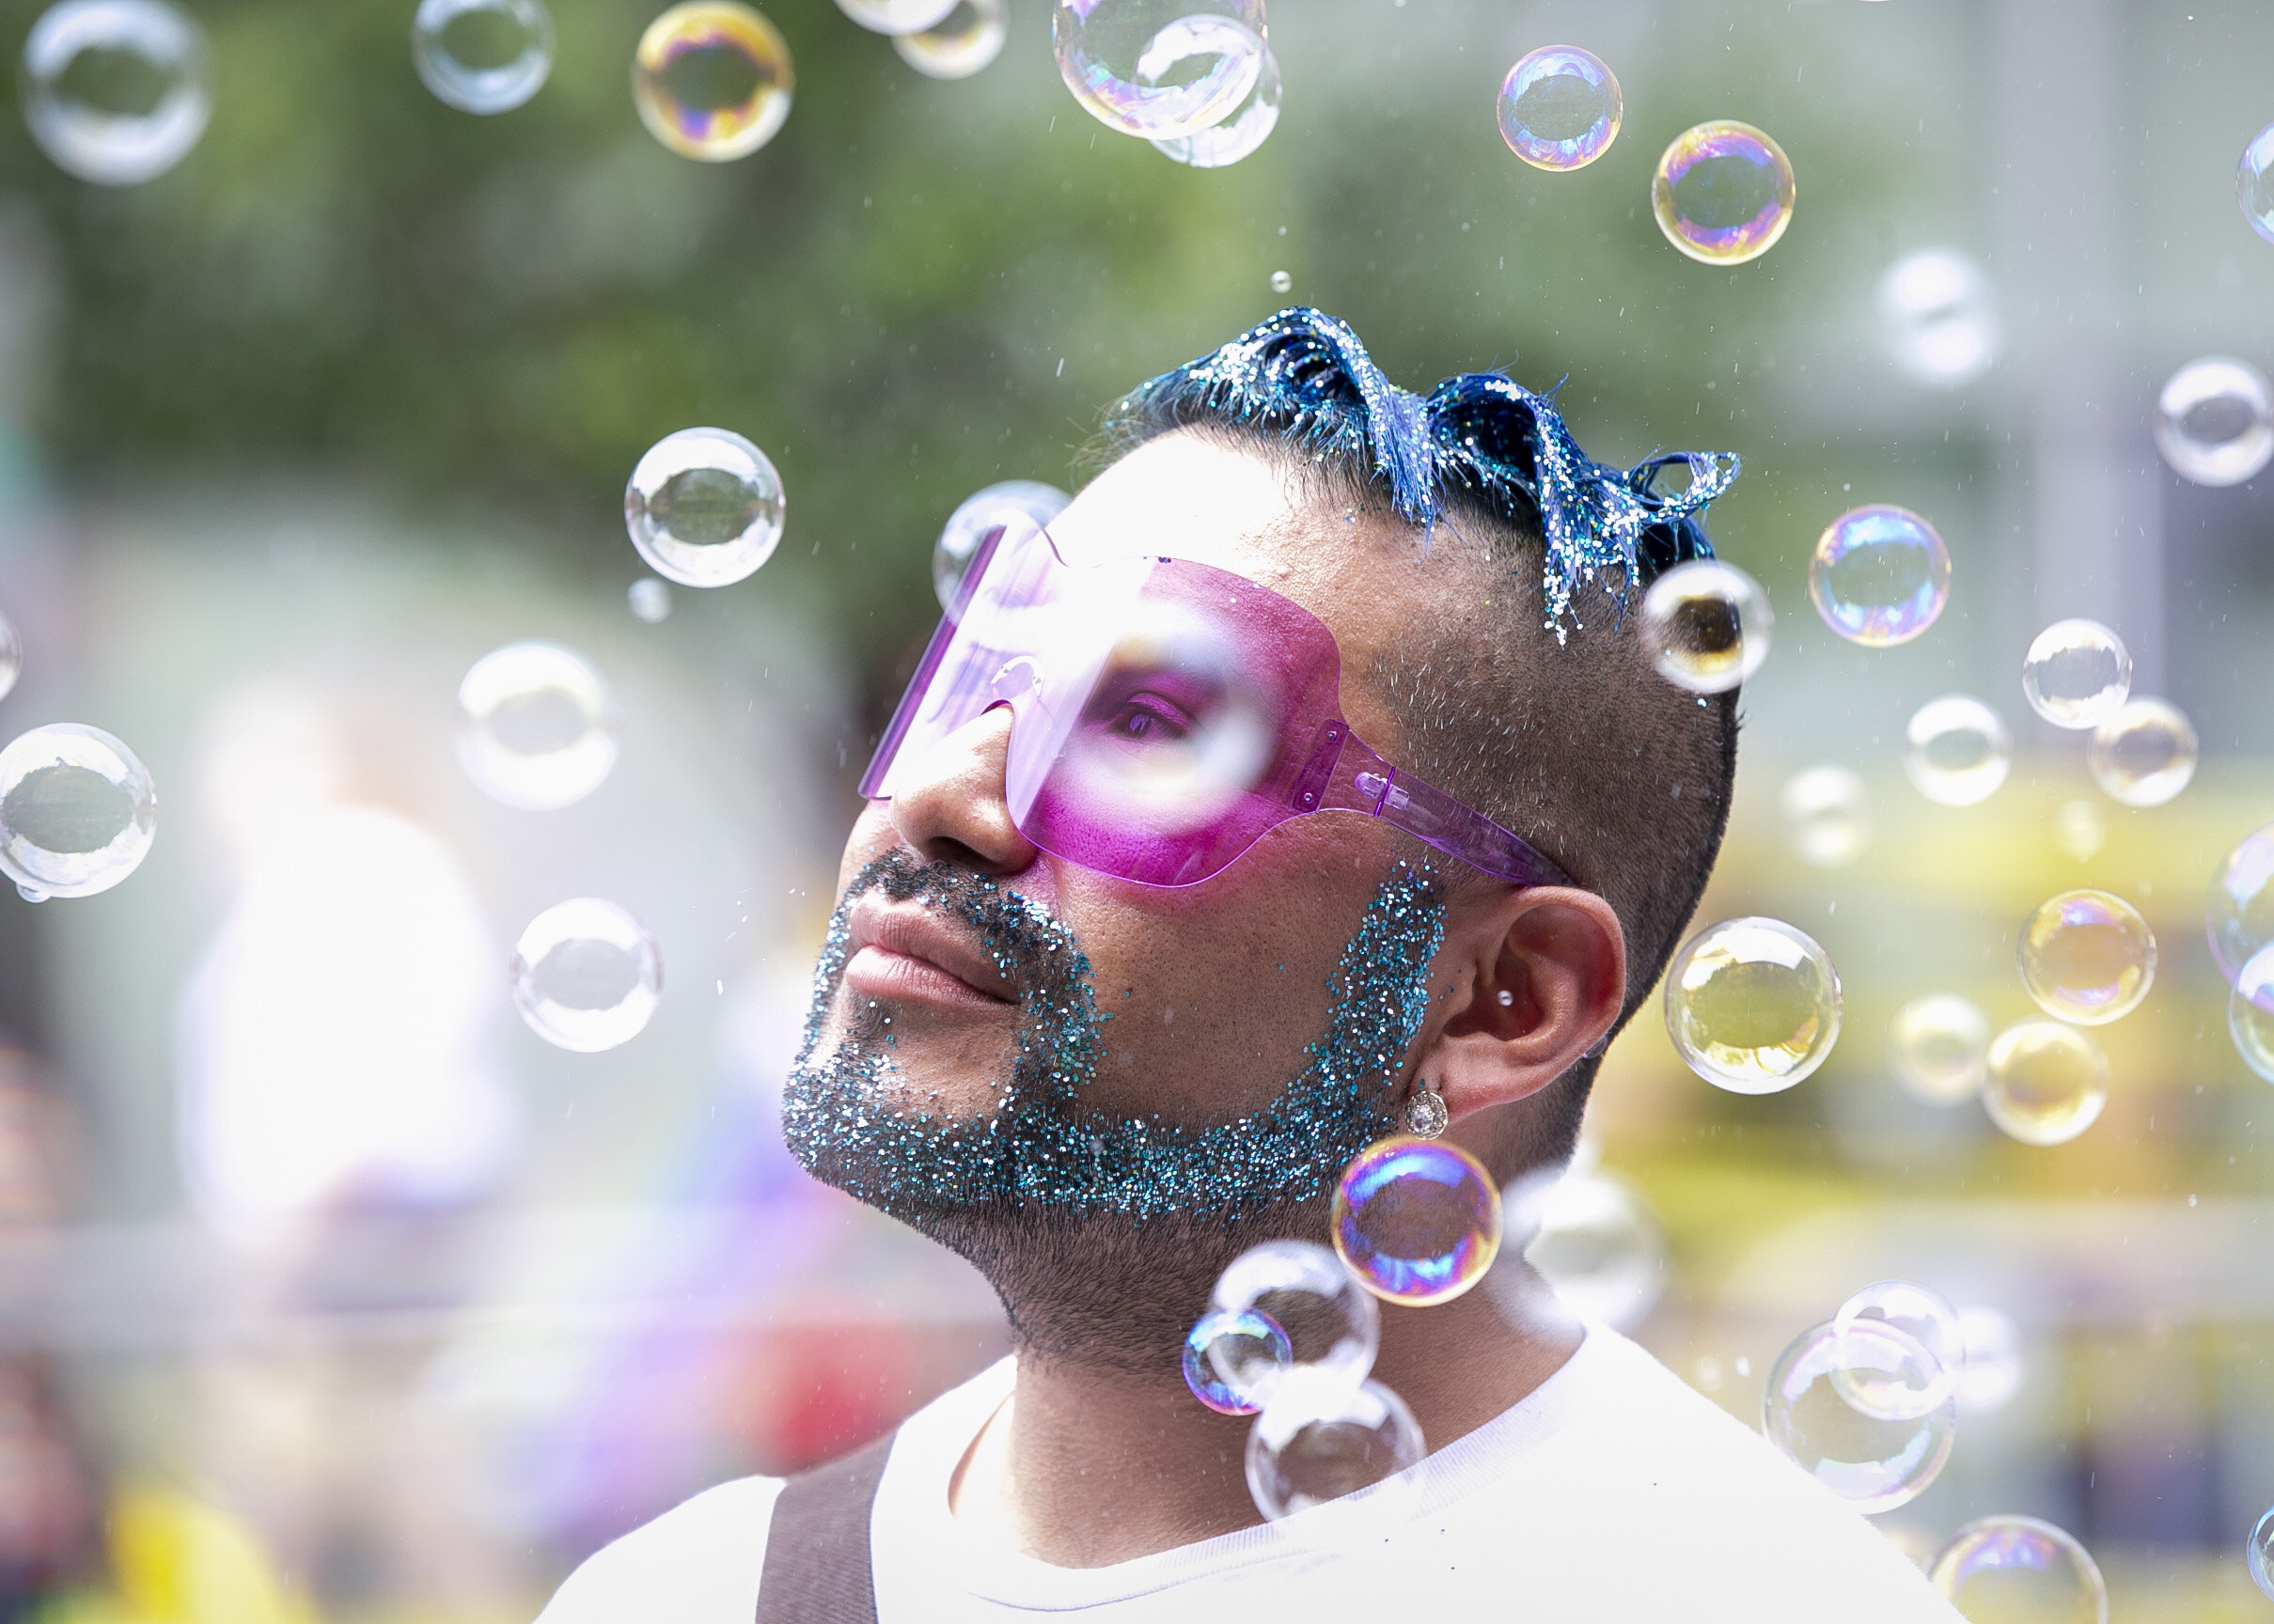  Jairo Garcia, 39, an attendee of the 50th annual Pride Parade, poses for a portrait before the march begins on Montrose Rd. in Chicago's Boystown neighborhood on June 30, 2019, for the Chicago Tribune.  